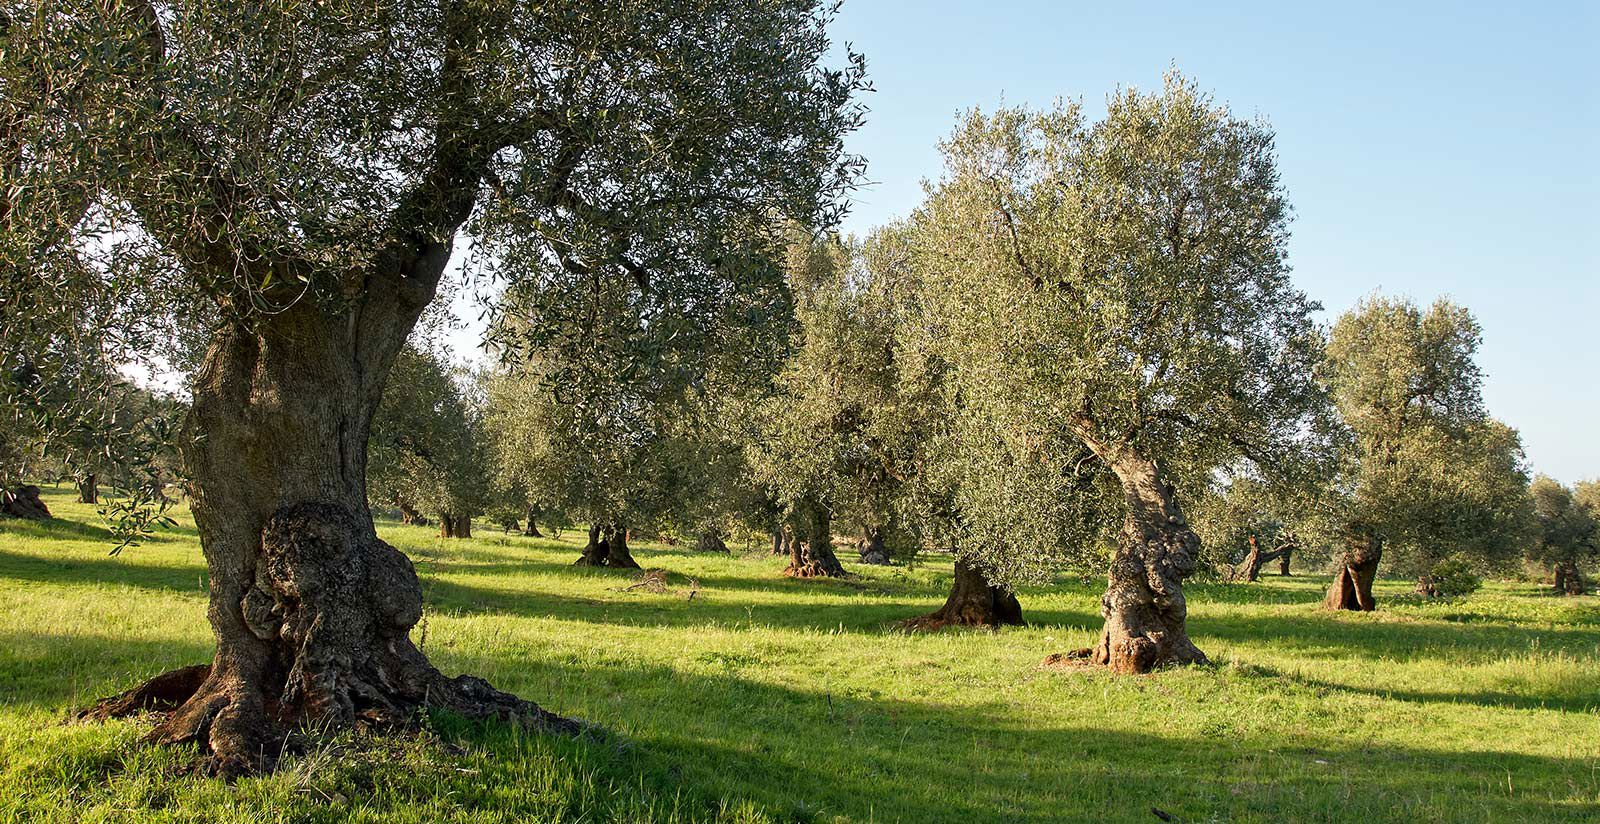 Adopt an ancient olive tree 2